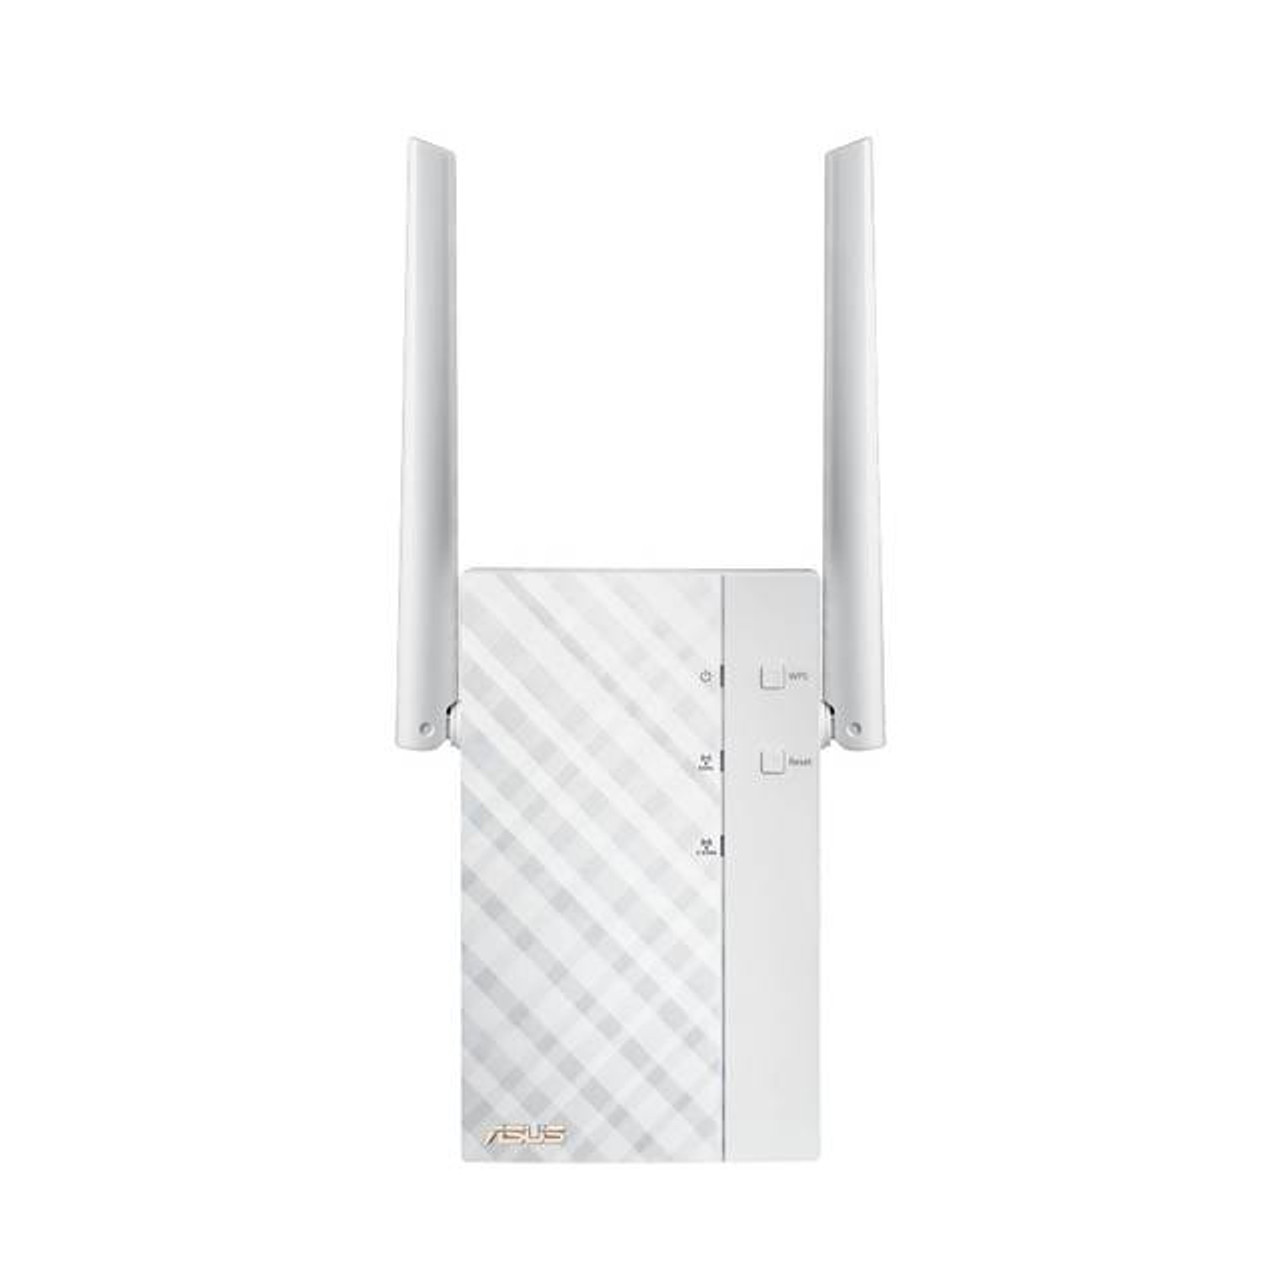 ASUS RP-AC56 Dual-Band Wireless-AC1200 Repeater/ Access Point/ Media Bridge